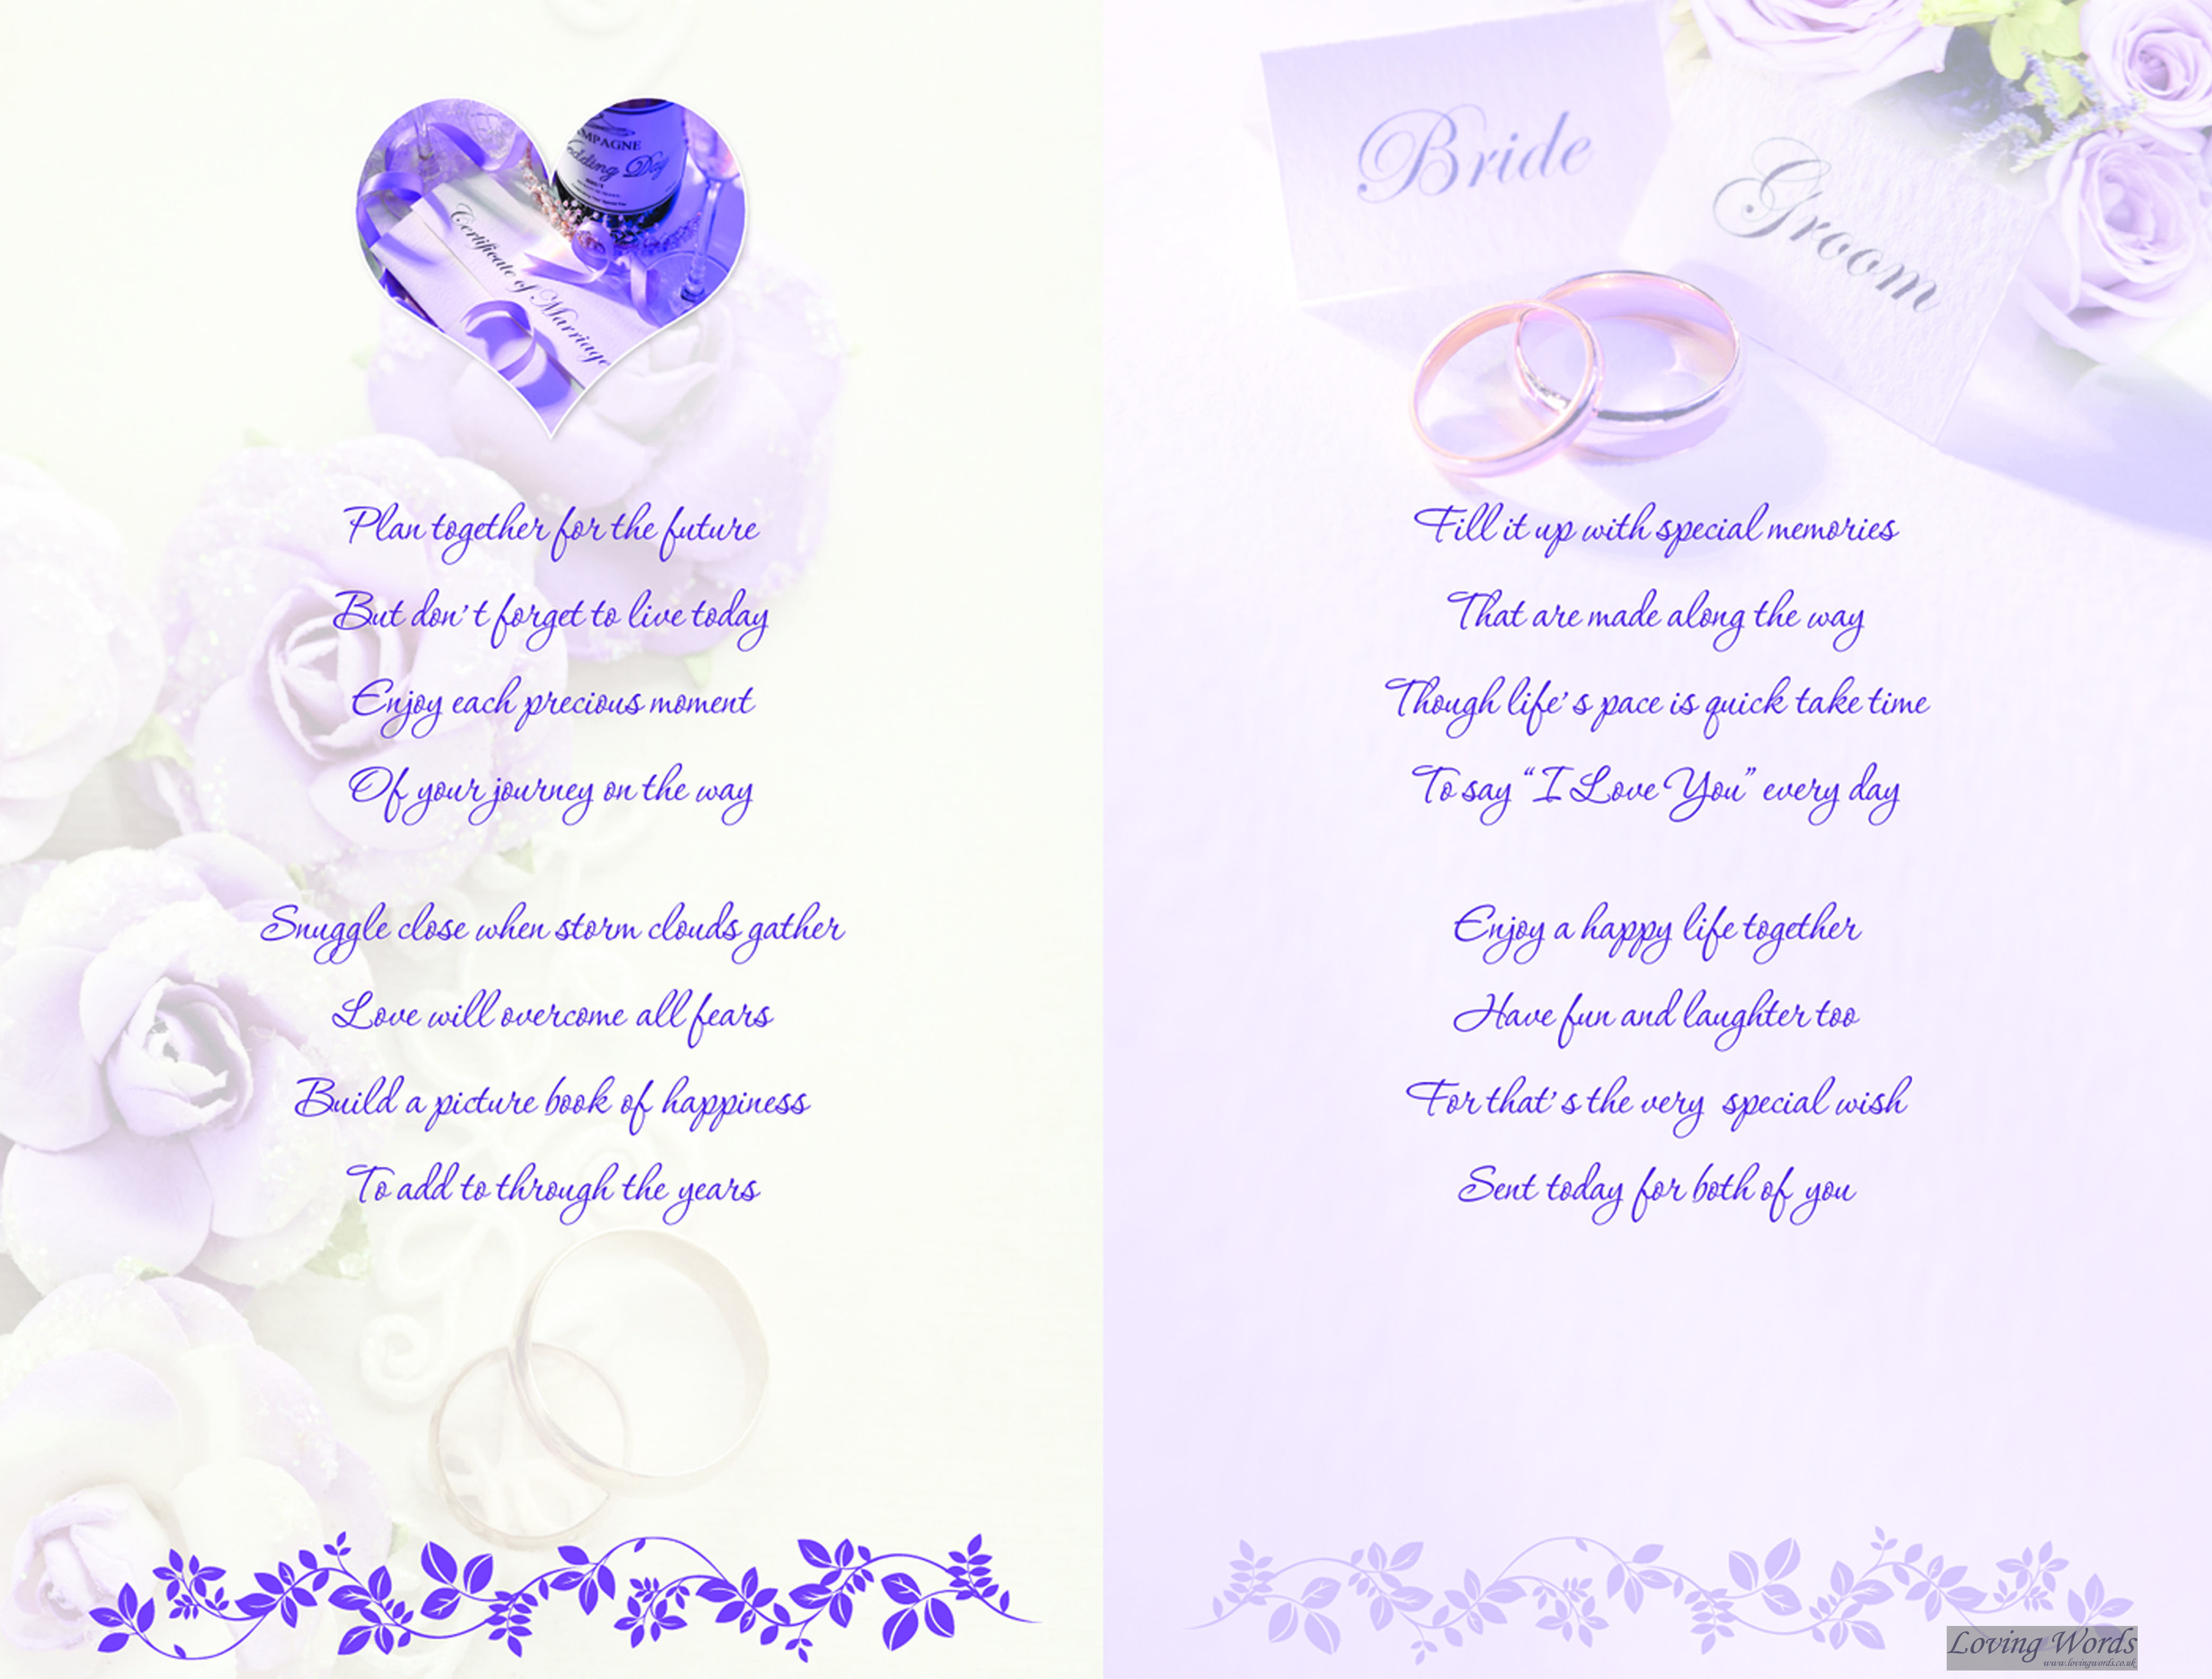 Son & Daughter Wedding Day | Greeting Cards by Loving Words